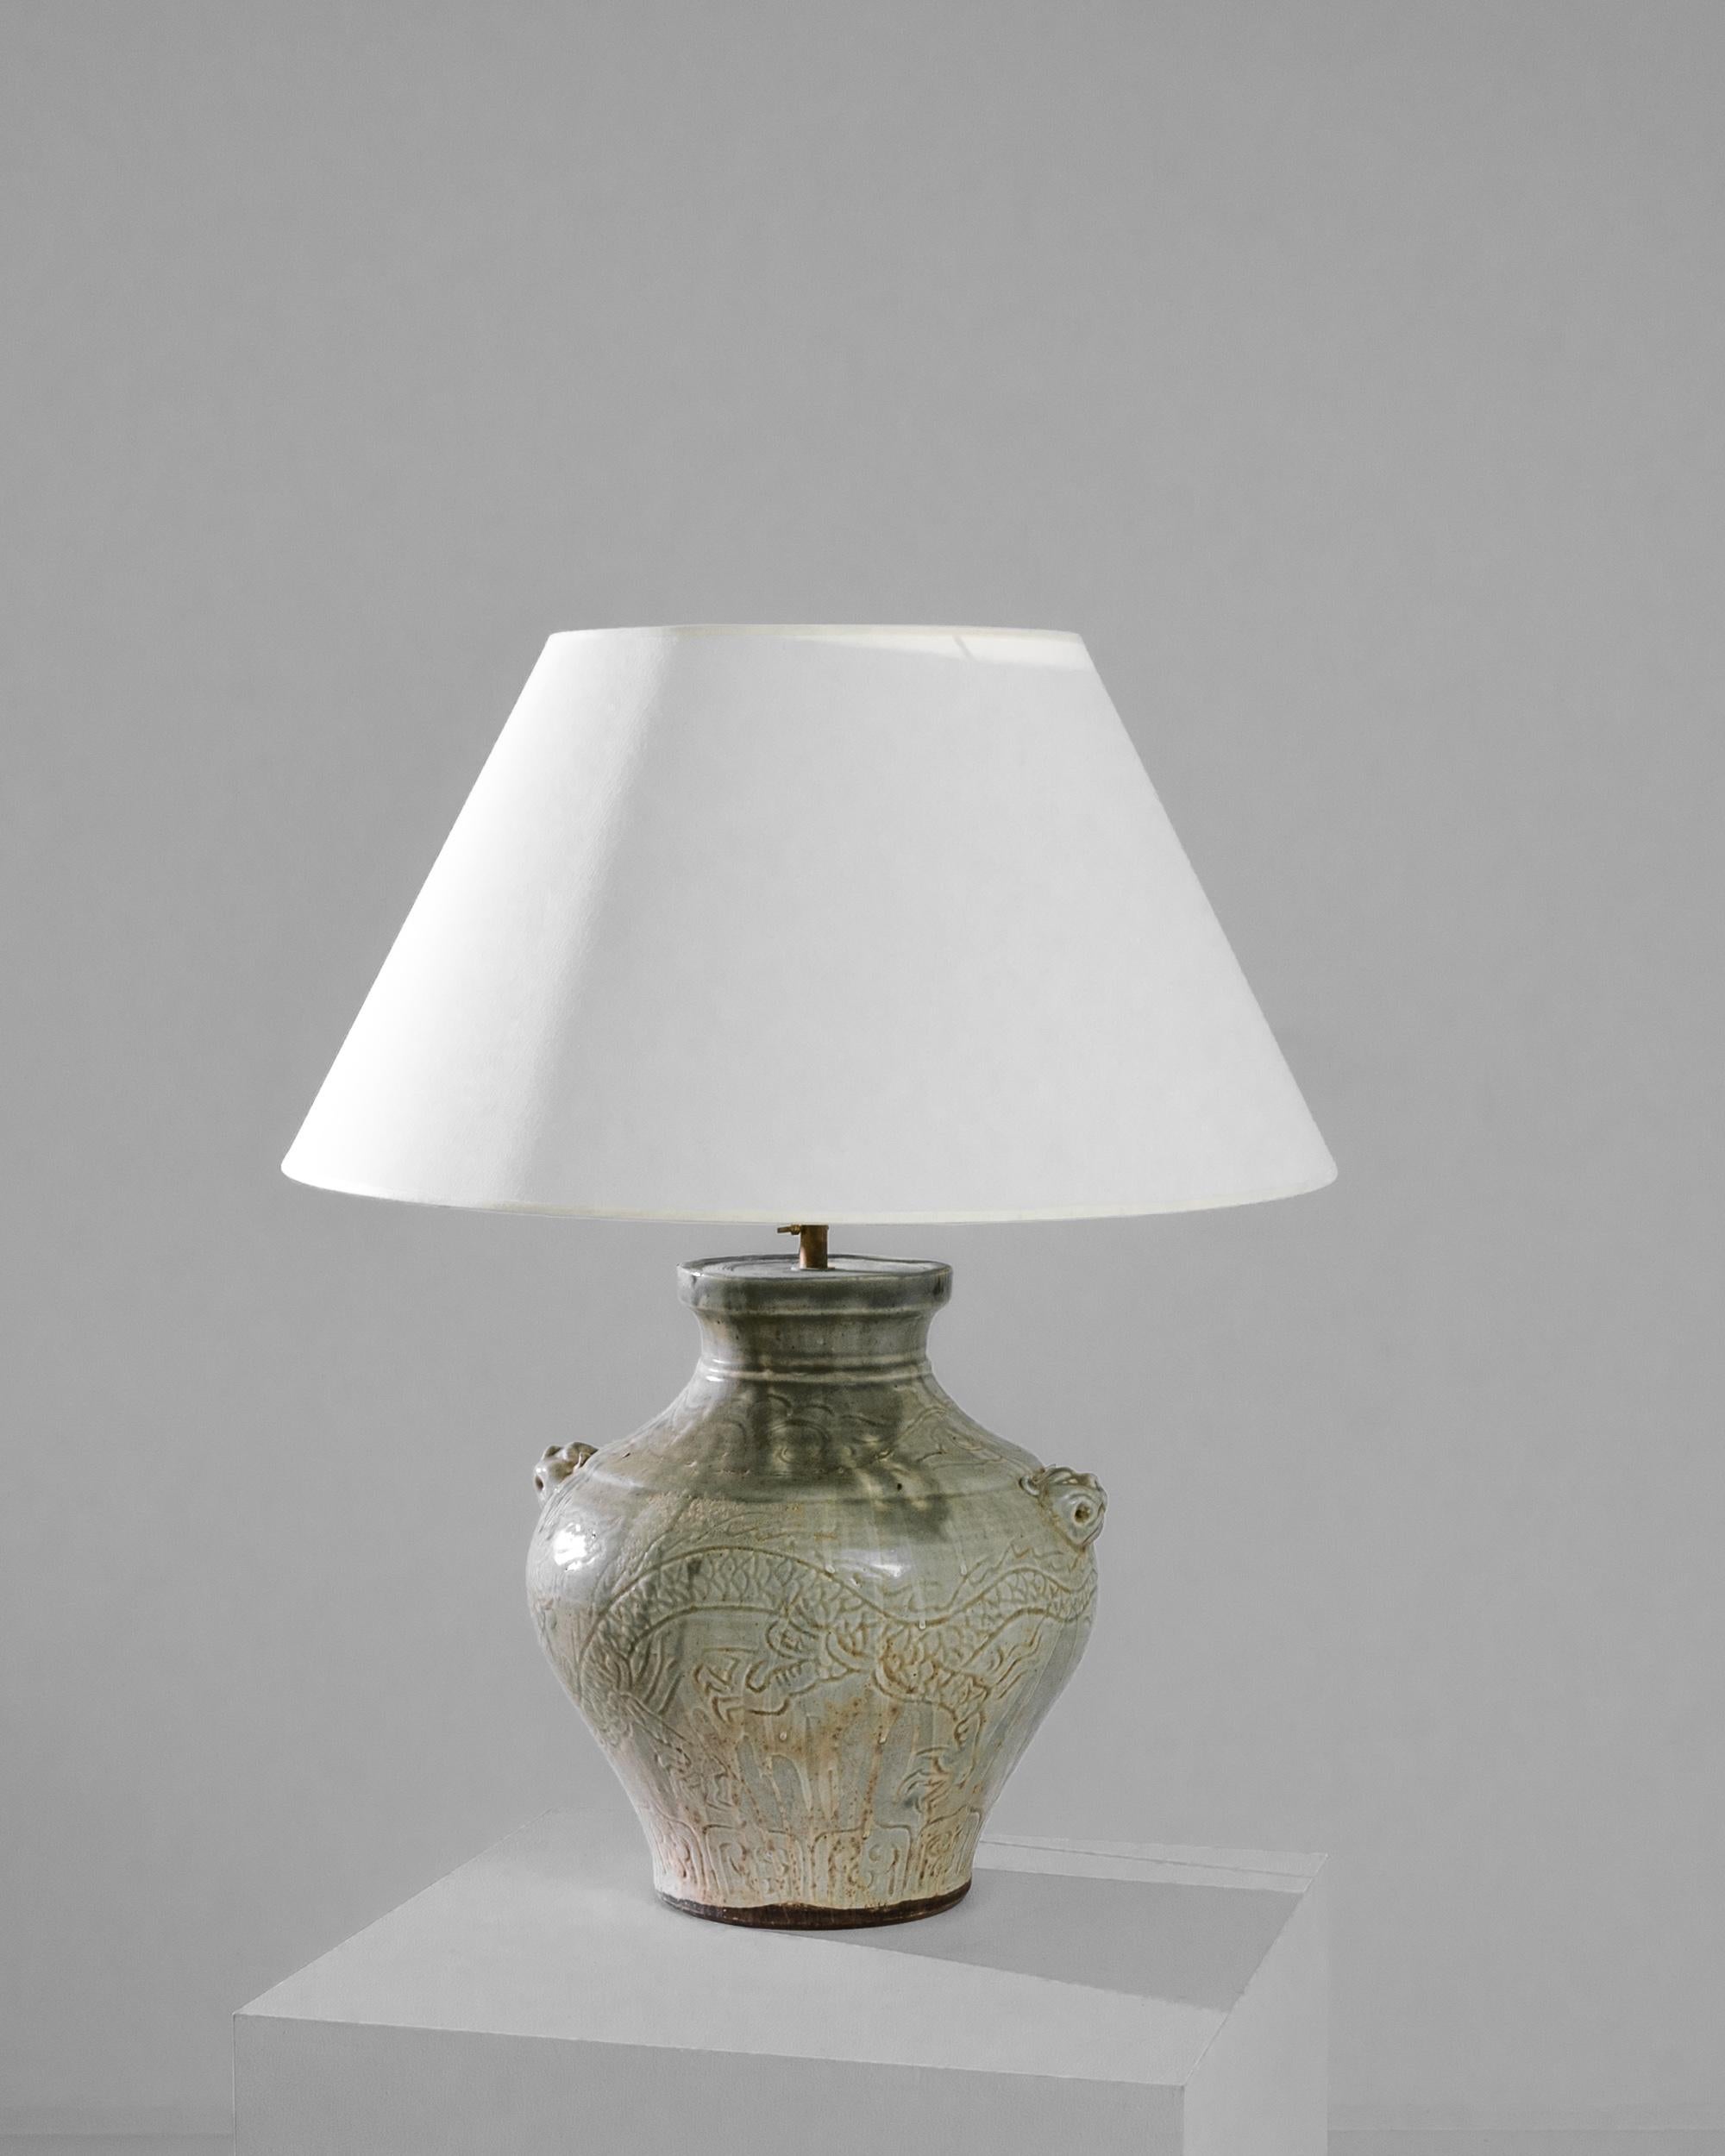 An exceptional find to inspire your collection. This vintage Chinese pear shaped vase has been adapted into a beautiful table lamp. Polished brass meets a green jade dragon glaze, enlightening your space with an uncompromising contrast. The textured